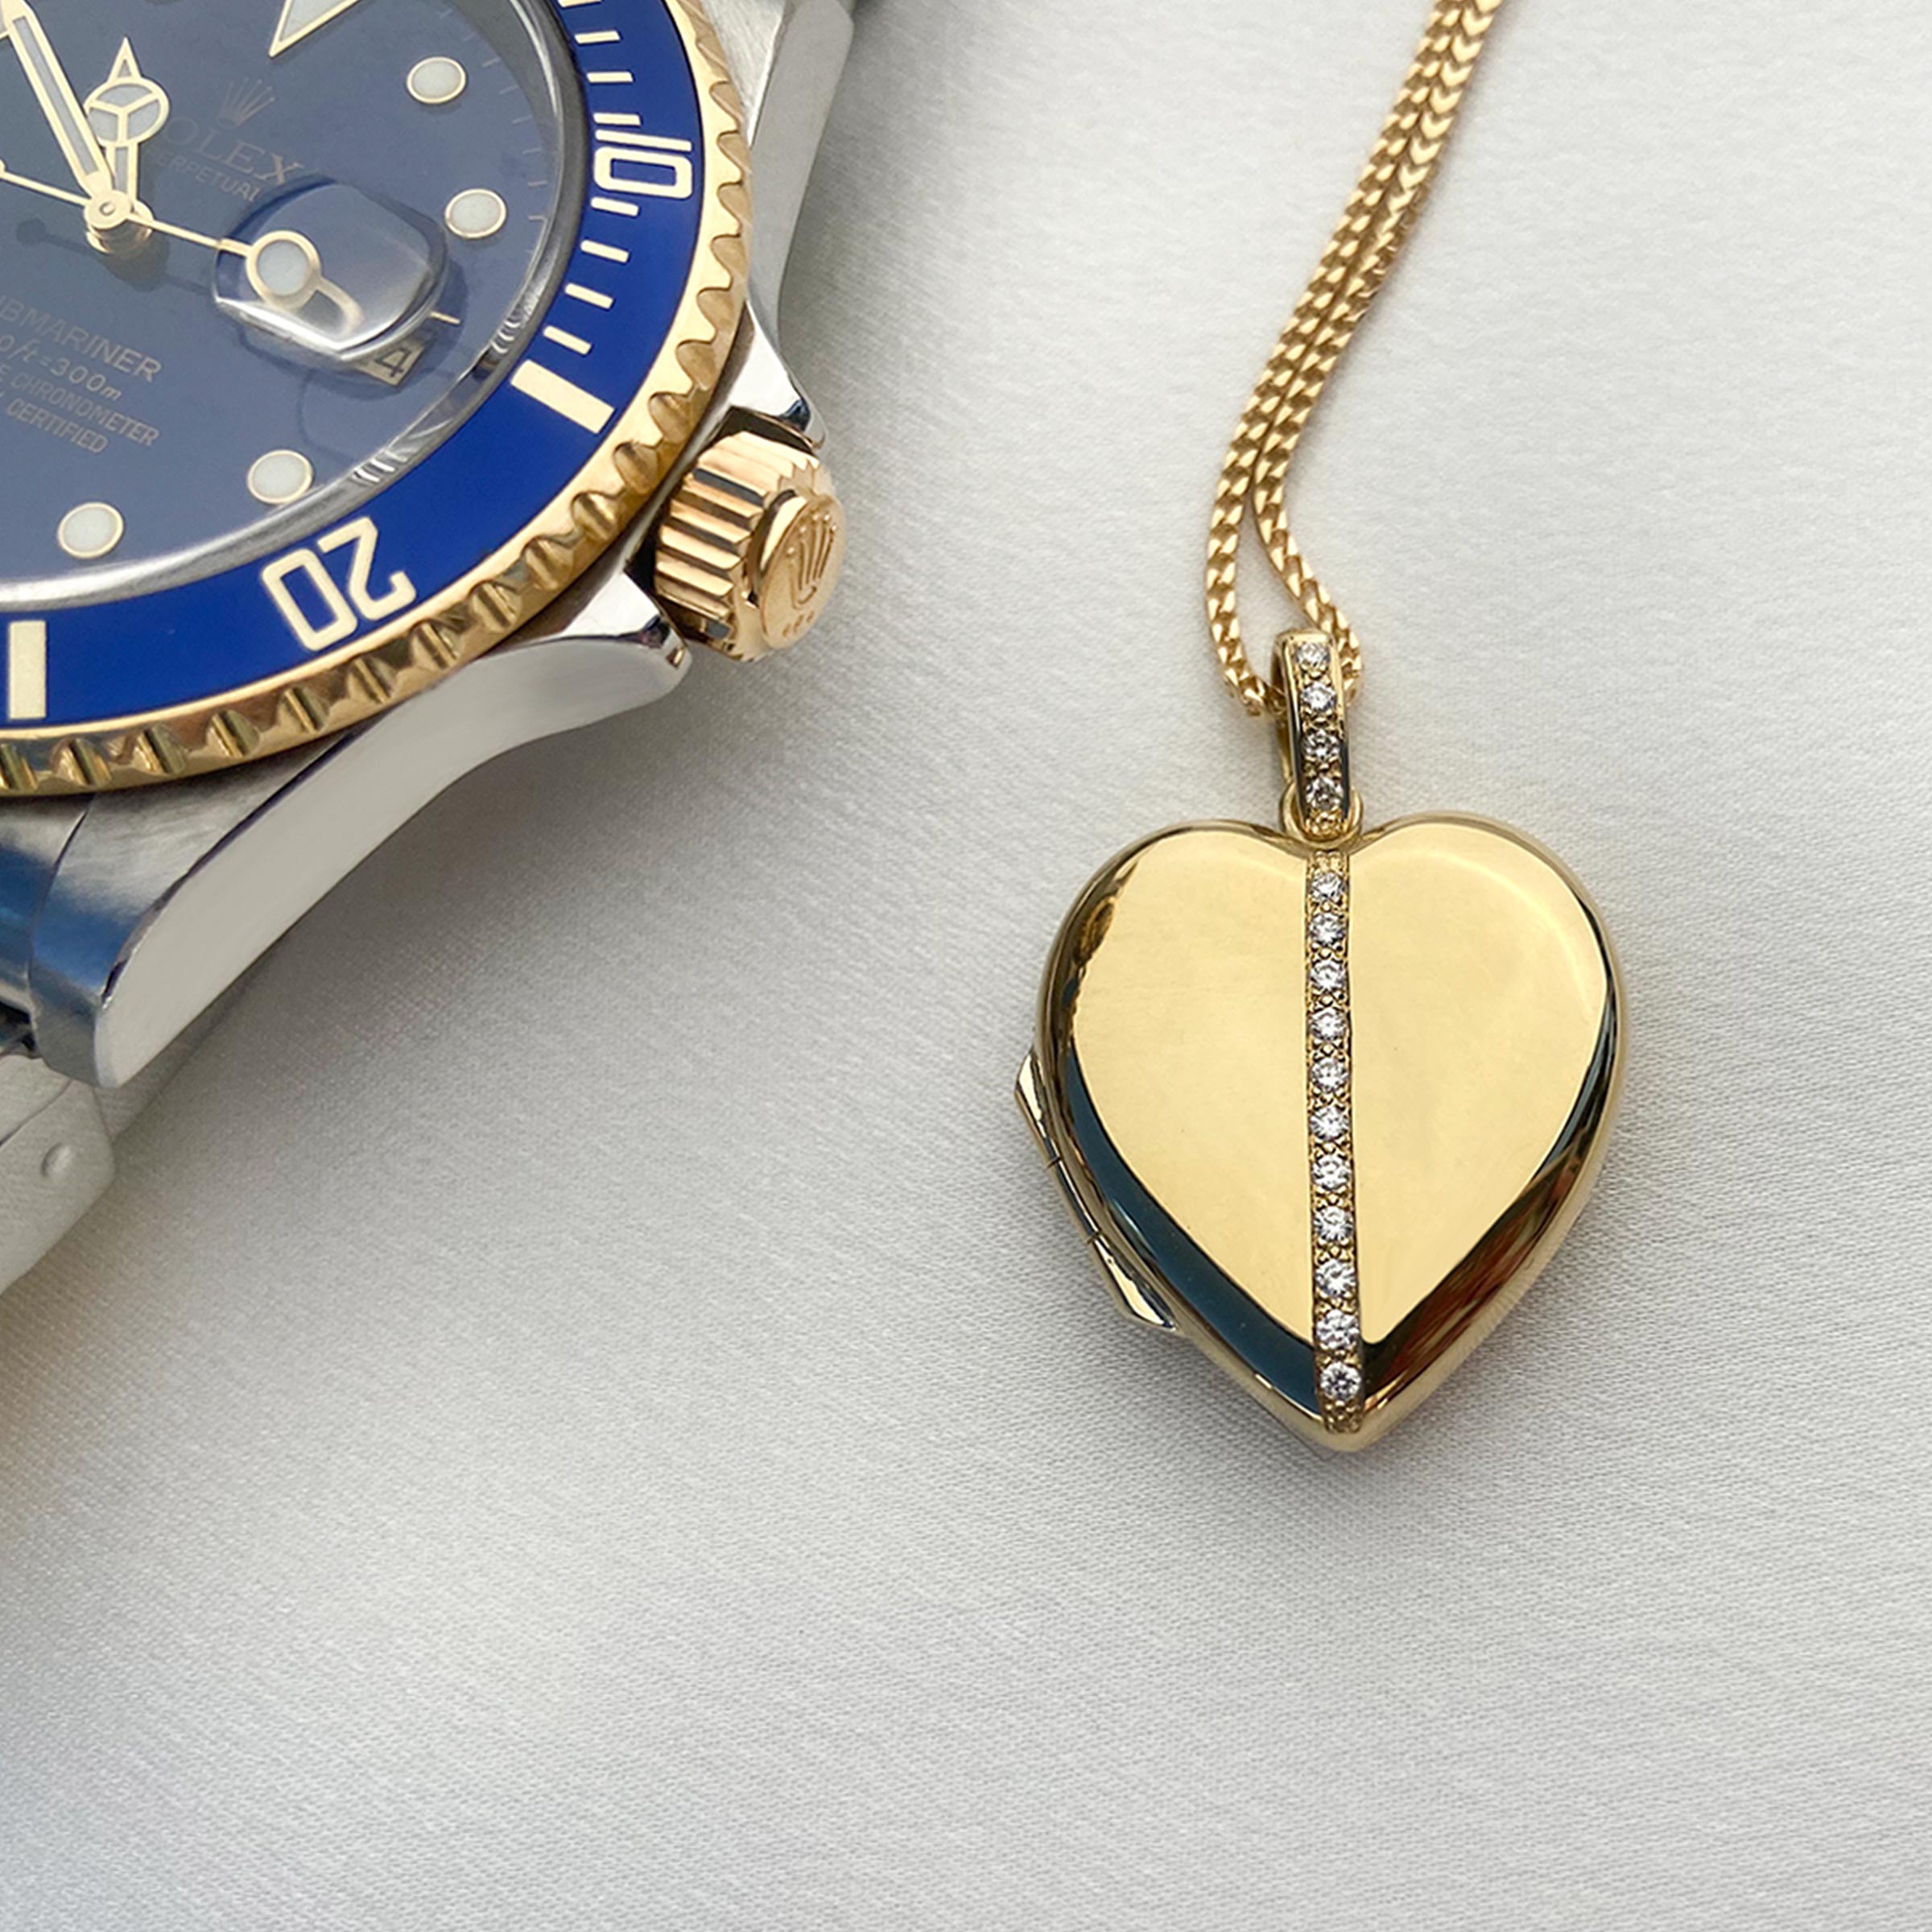 Product title: Contemporary 18 ct Diamond Heart, product type: Locket